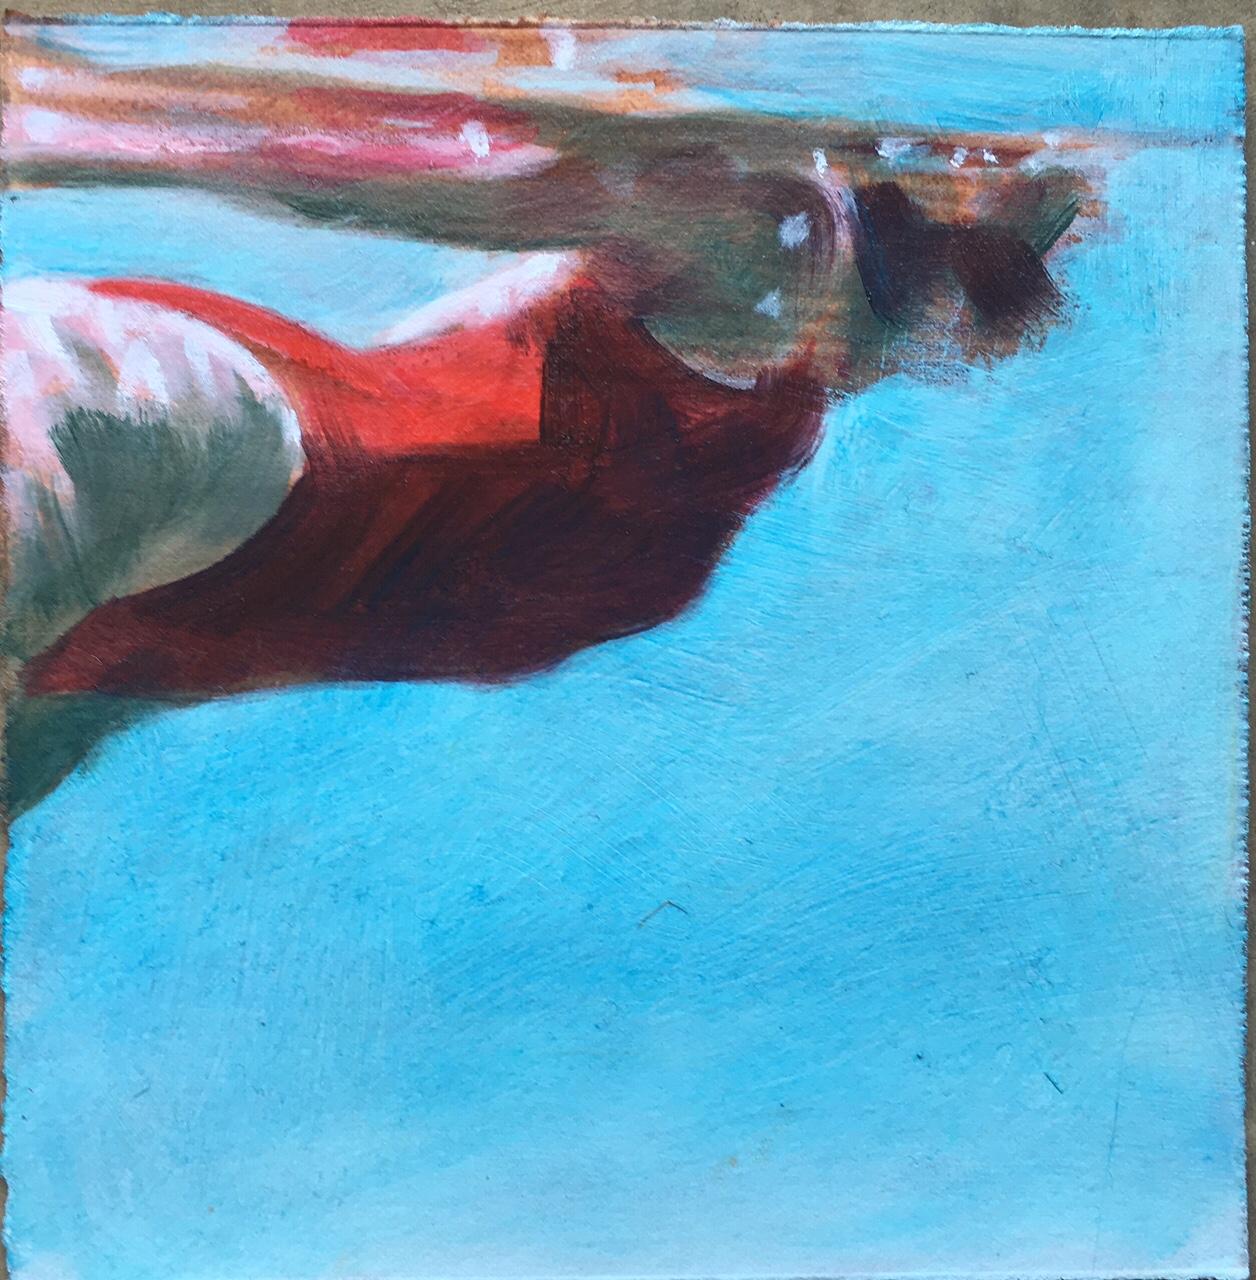 Carol Bennett Figurative Painting - "See Water (Paper)" oil painting of a woman in a red swimsuit in a blue pool